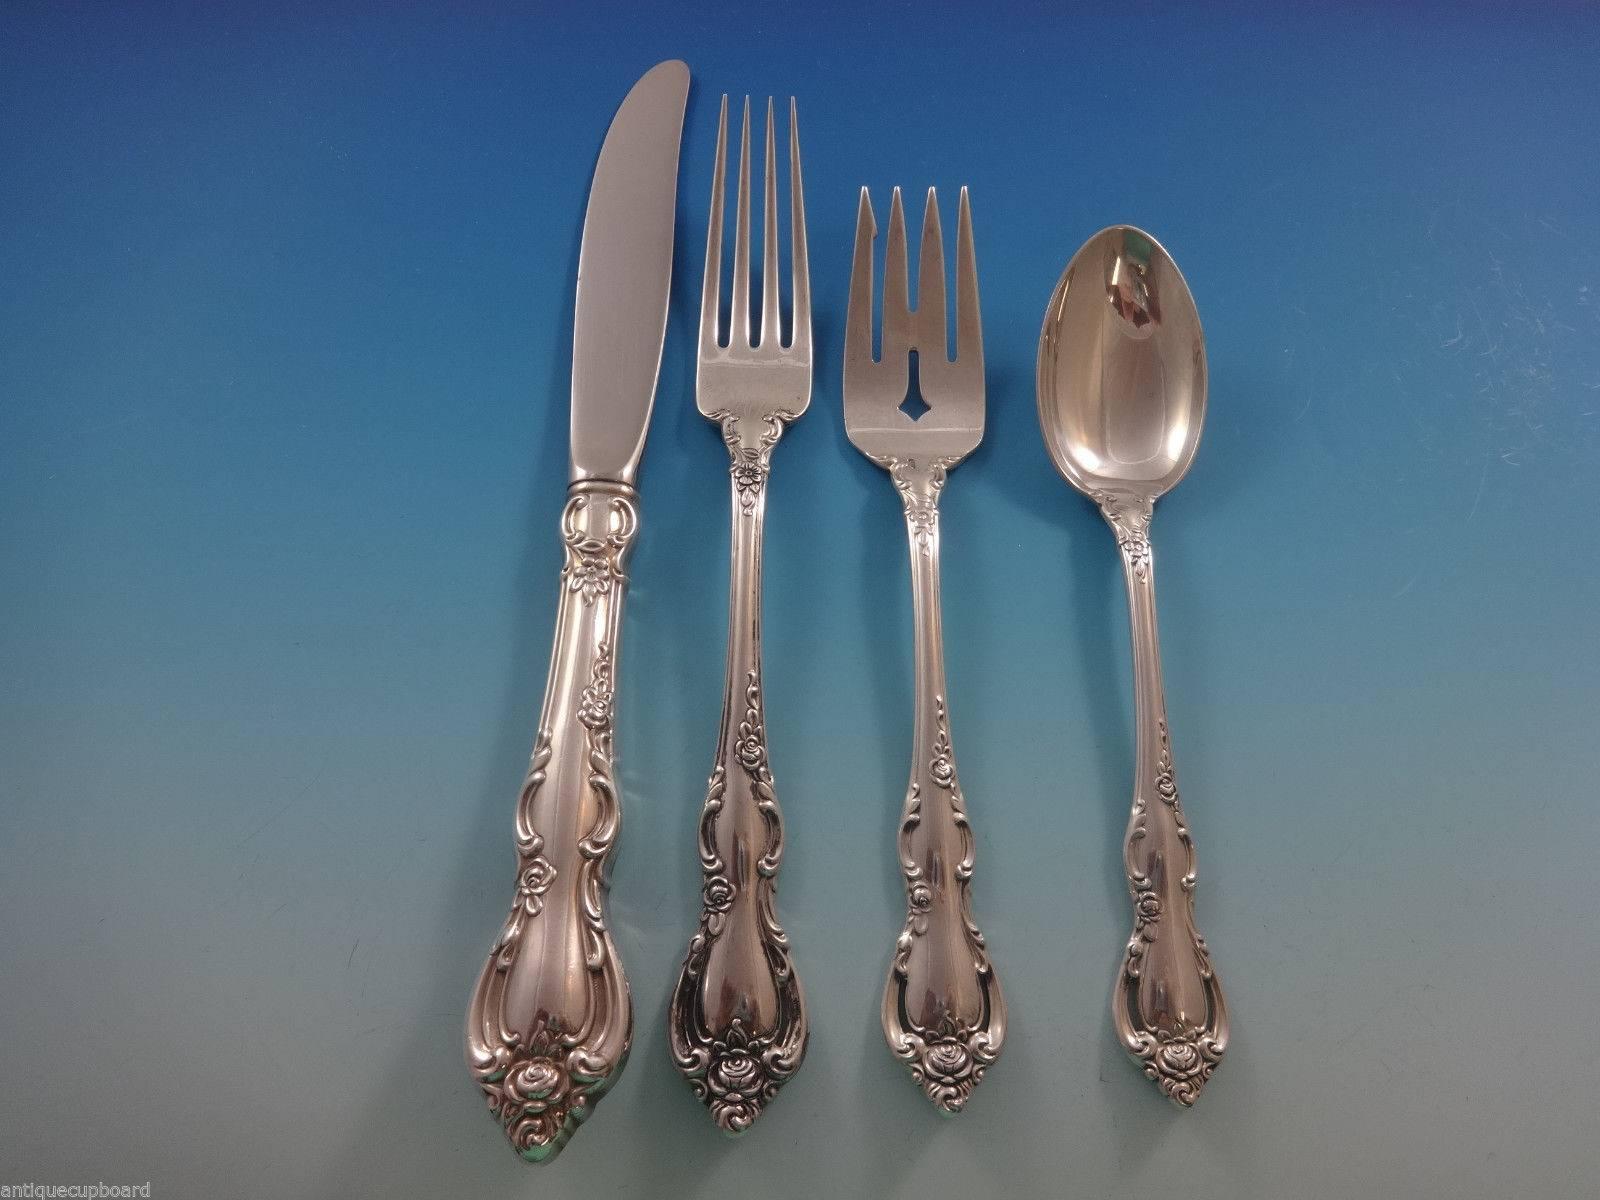 Danish Baroque by Towle sterling silver flatware set of 67 pieces. This set includes:

12 knives, 9